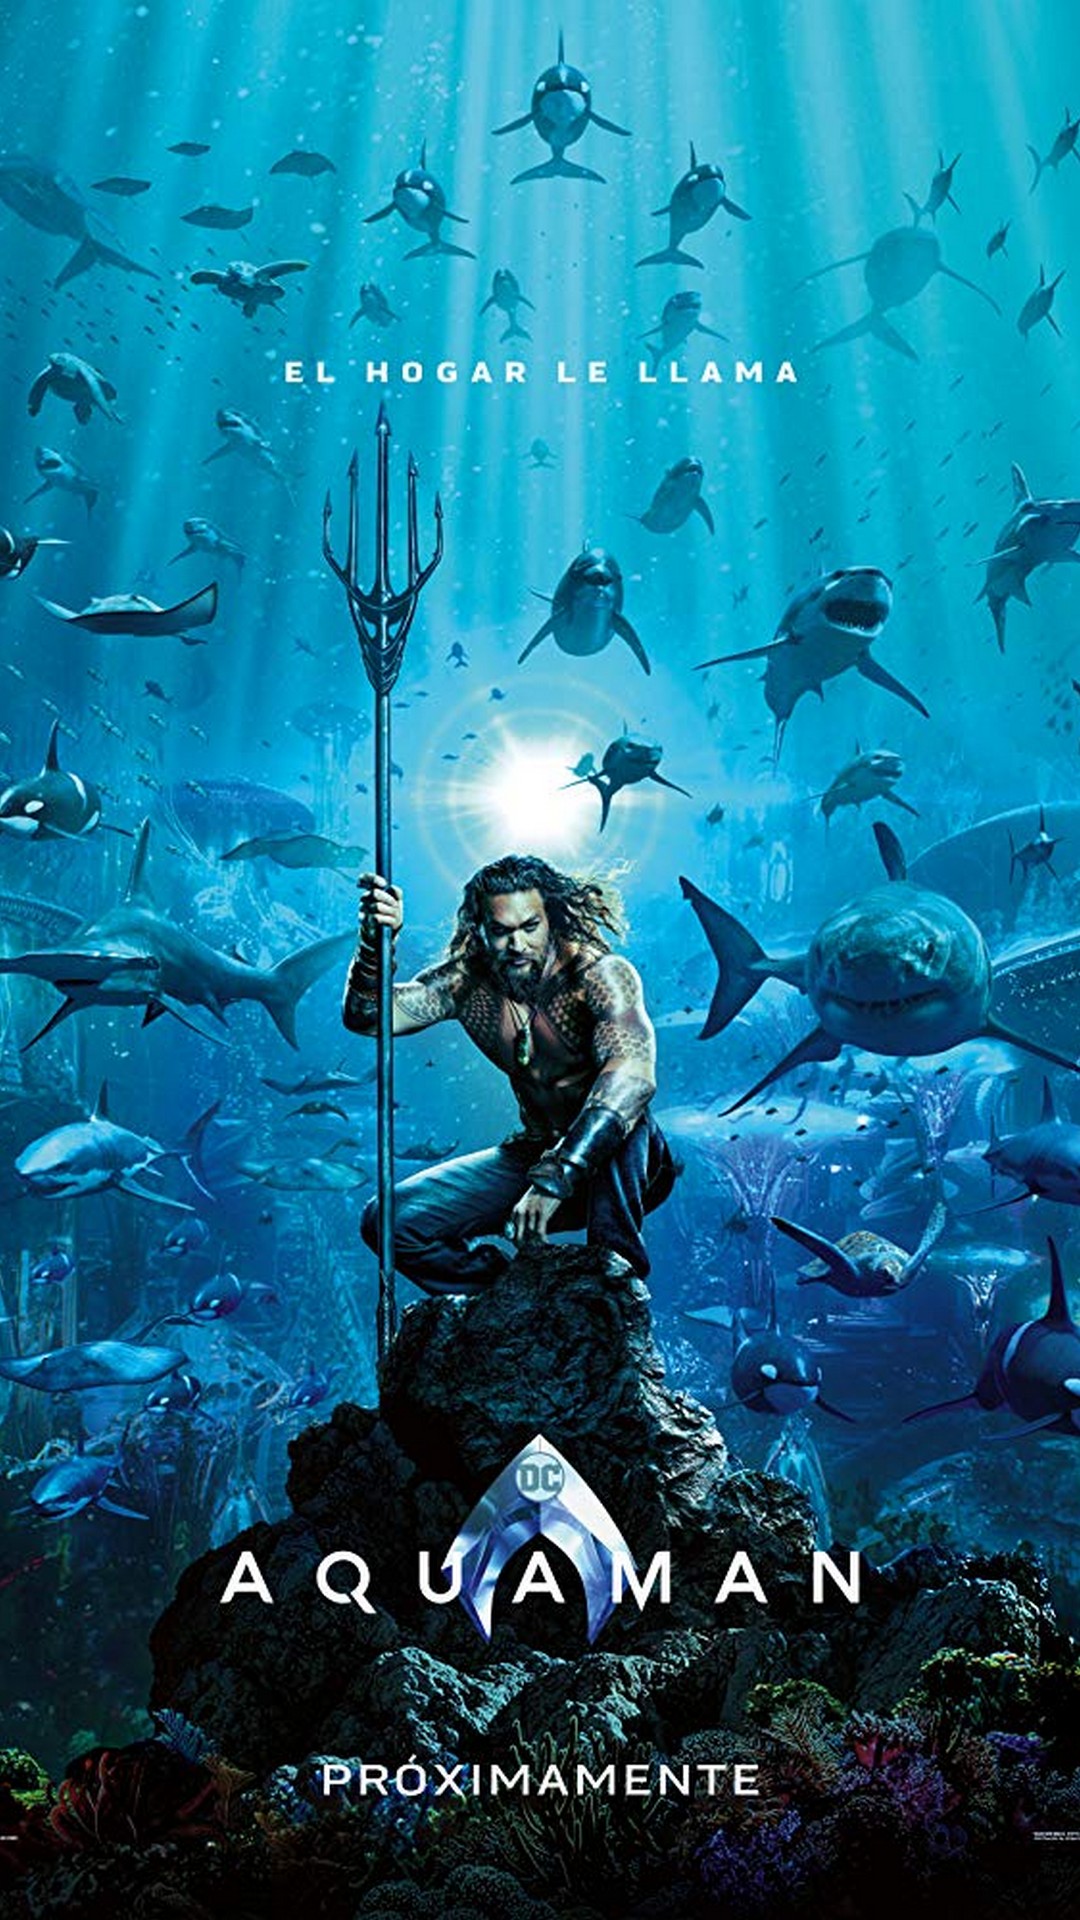 Wallpaper Aquaman iPhone with resolution 1080X1920 pixel. You can make this wallpaper for your iPhone 5, 6, 7, 8, X backgrounds, Mobile Screensaver, or iPad Lock Screen